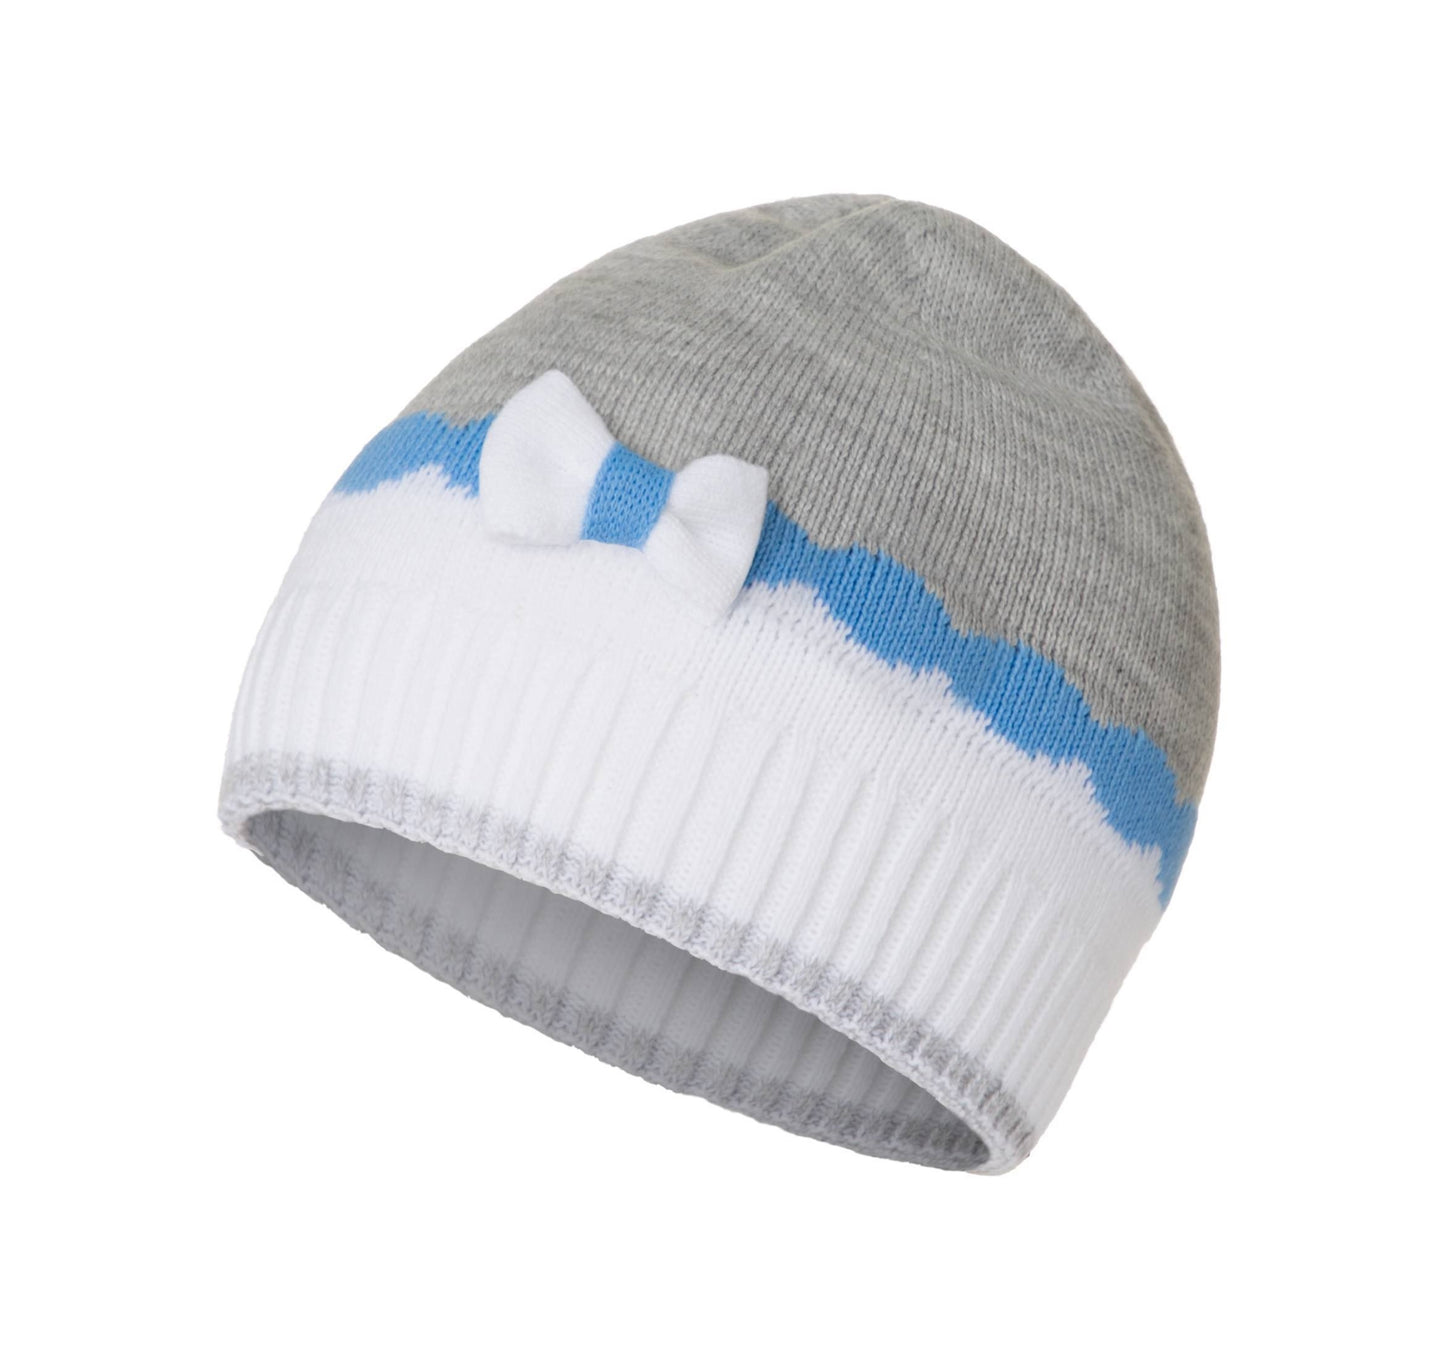 Conte/Esli Double Knitted Children's Hats - For Girls (17С-98СП)